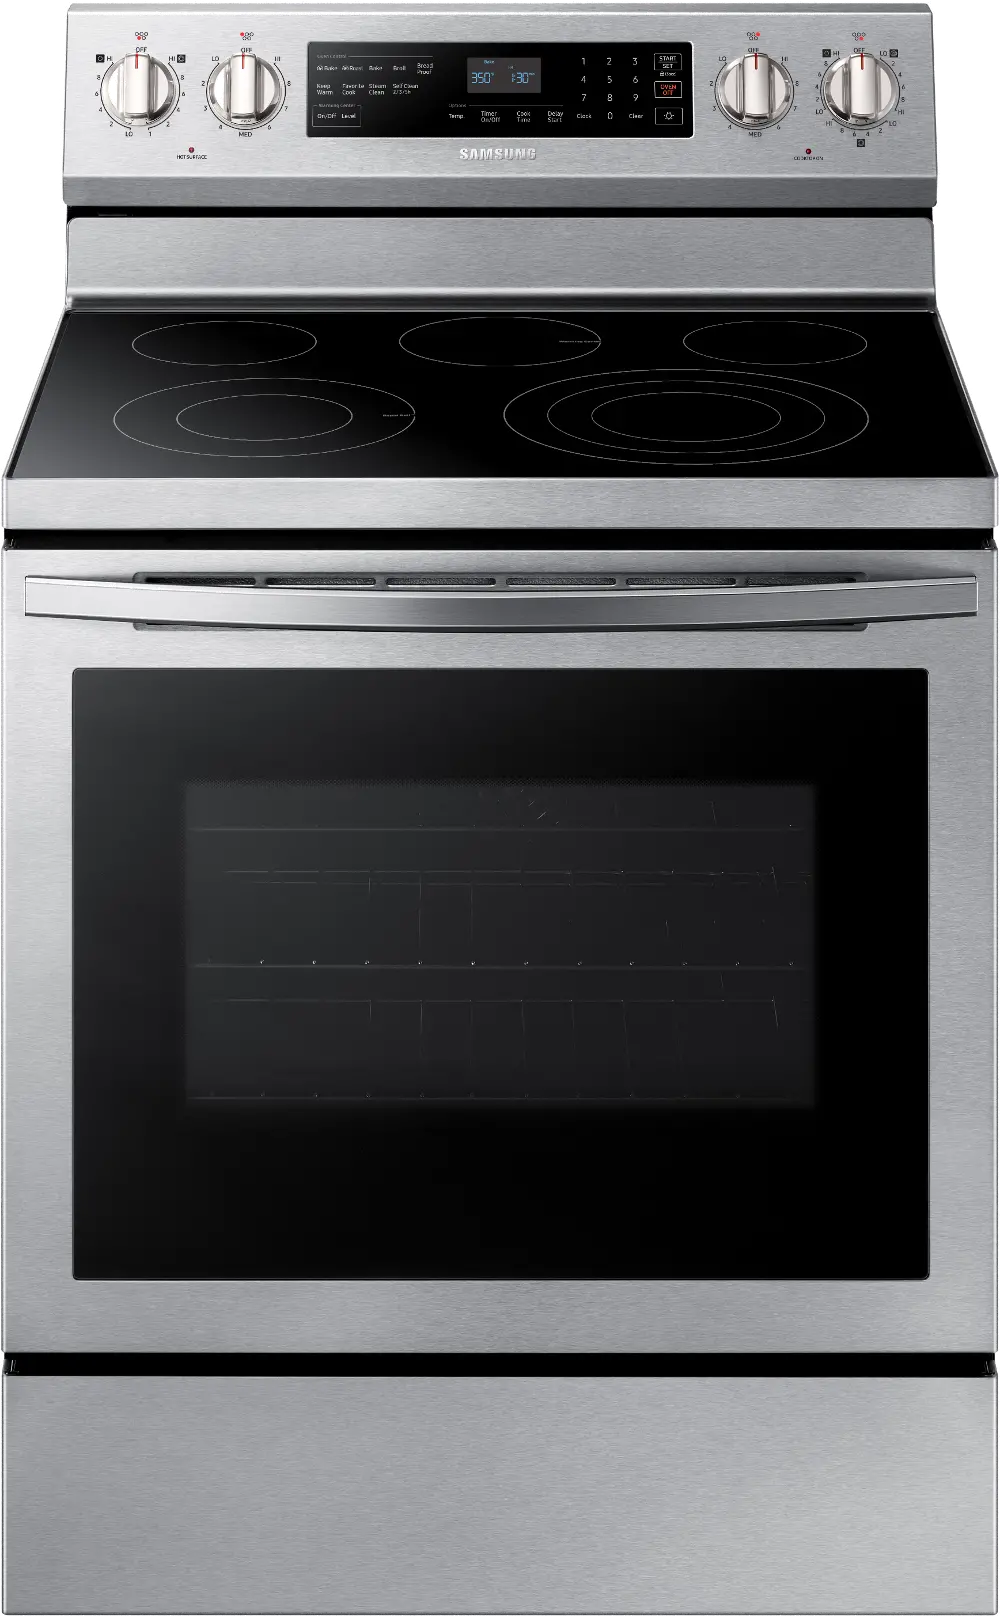 NE59R6631SS Samsung Electric Convection Range - Stainless Steel-1